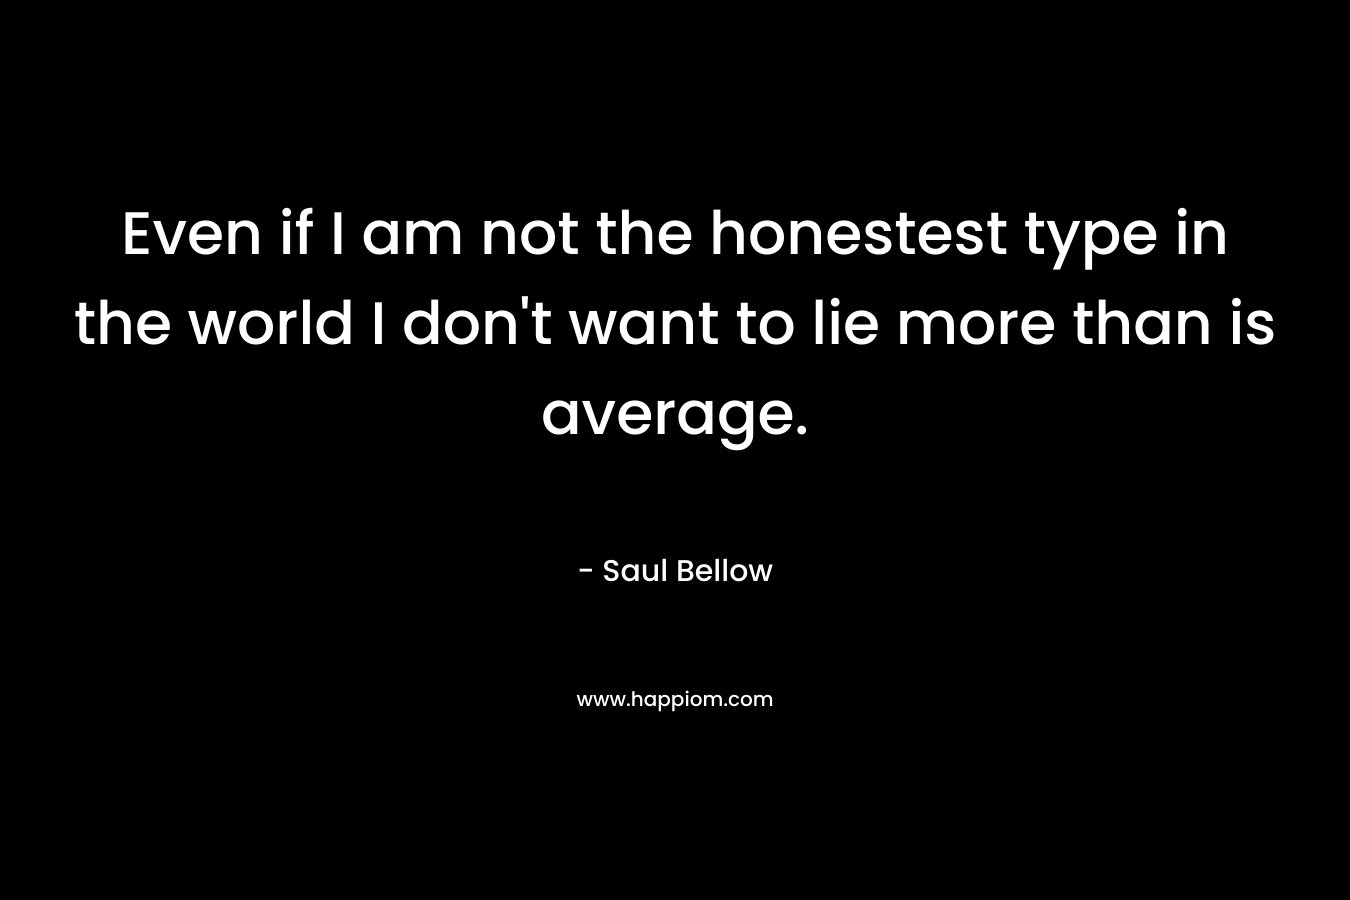 Even if I am not the honestest type in the world I don't want to lie more than is average.